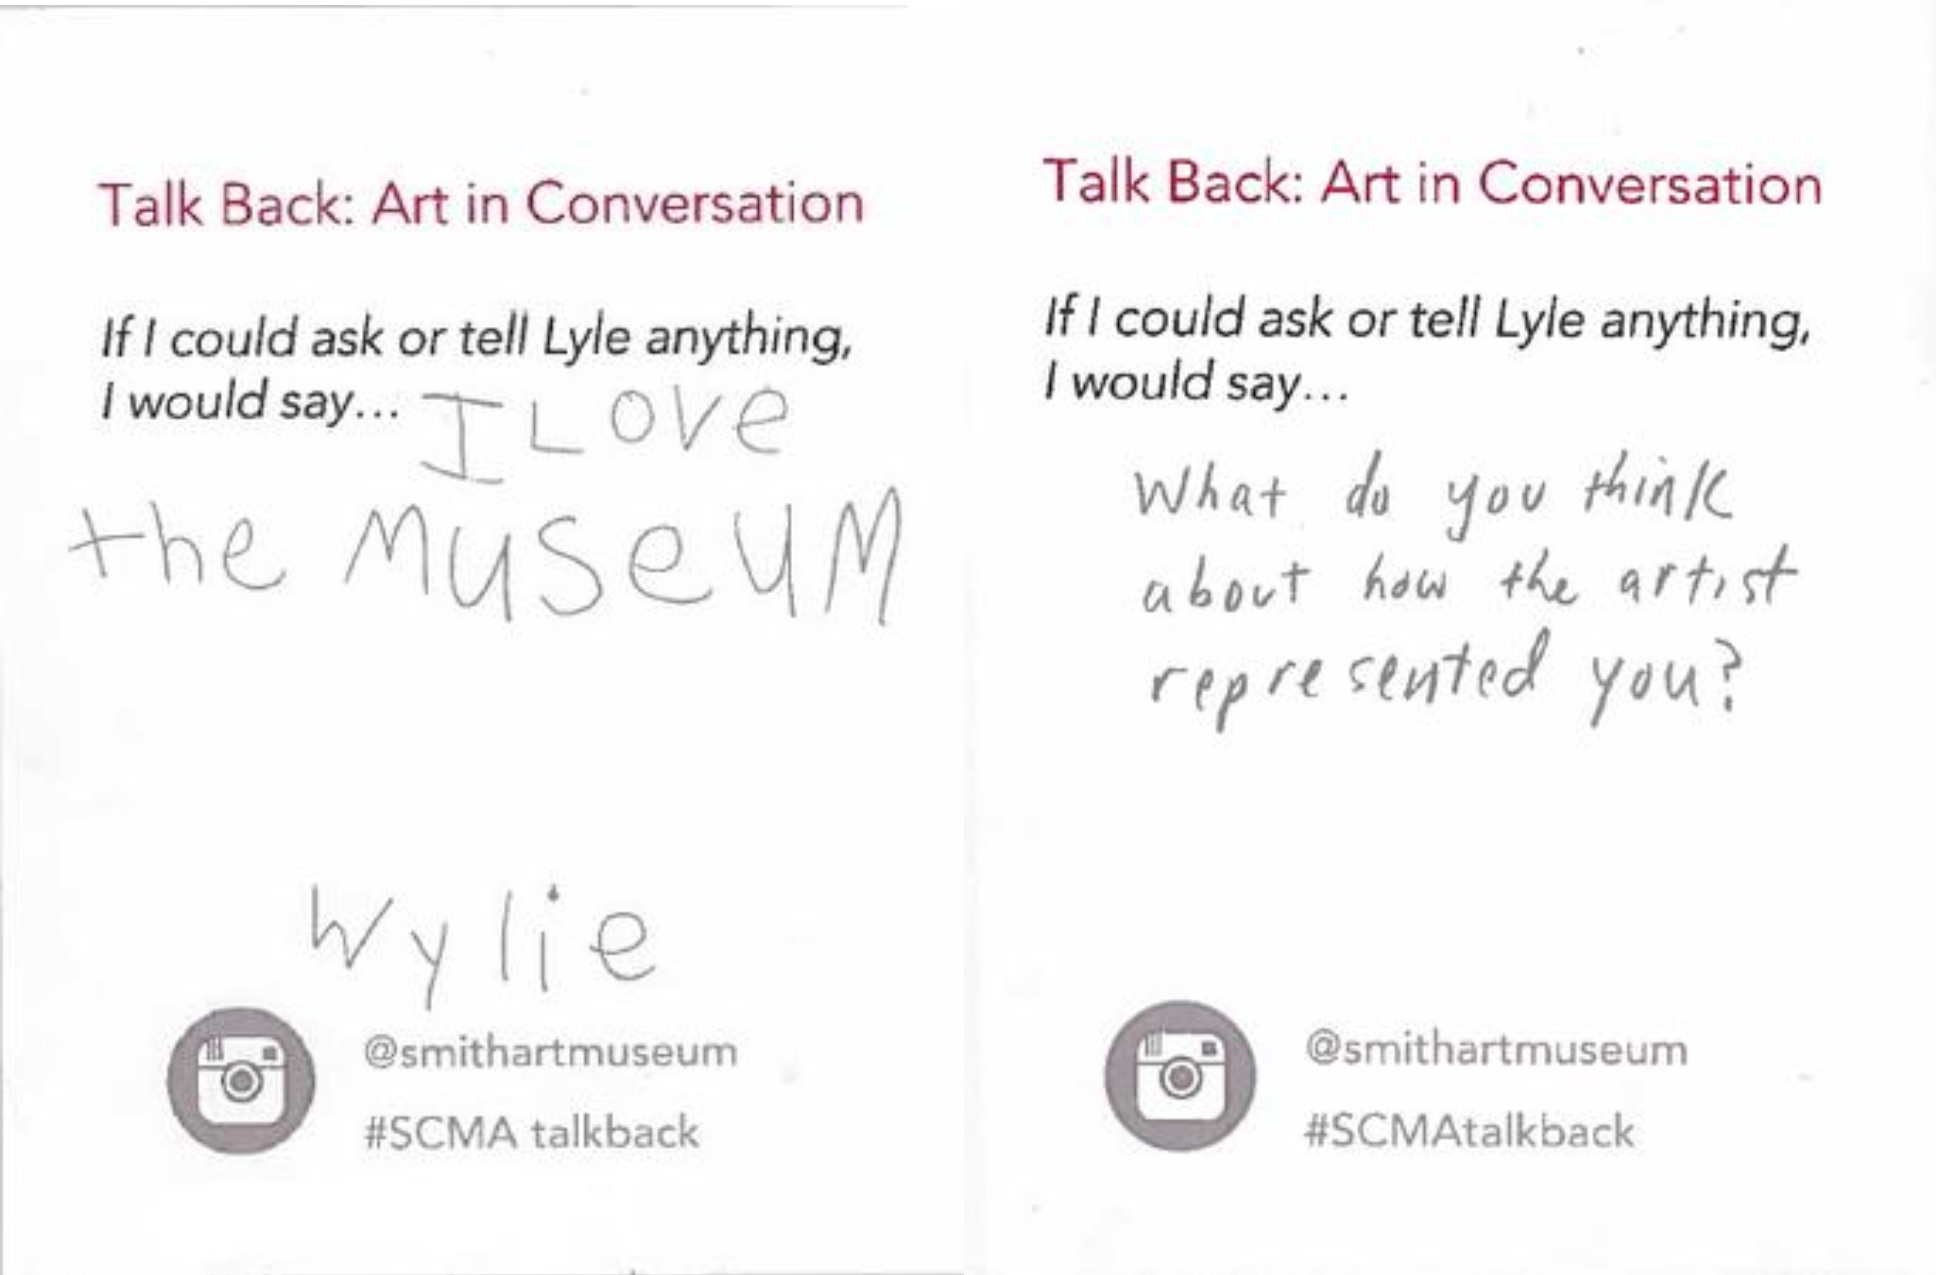 Two responses to Close’s ‘Lyle’: (1) (in a child’s handwriting:) I love the Museum. Wylie. (2) What do you think about how the artist represented you?